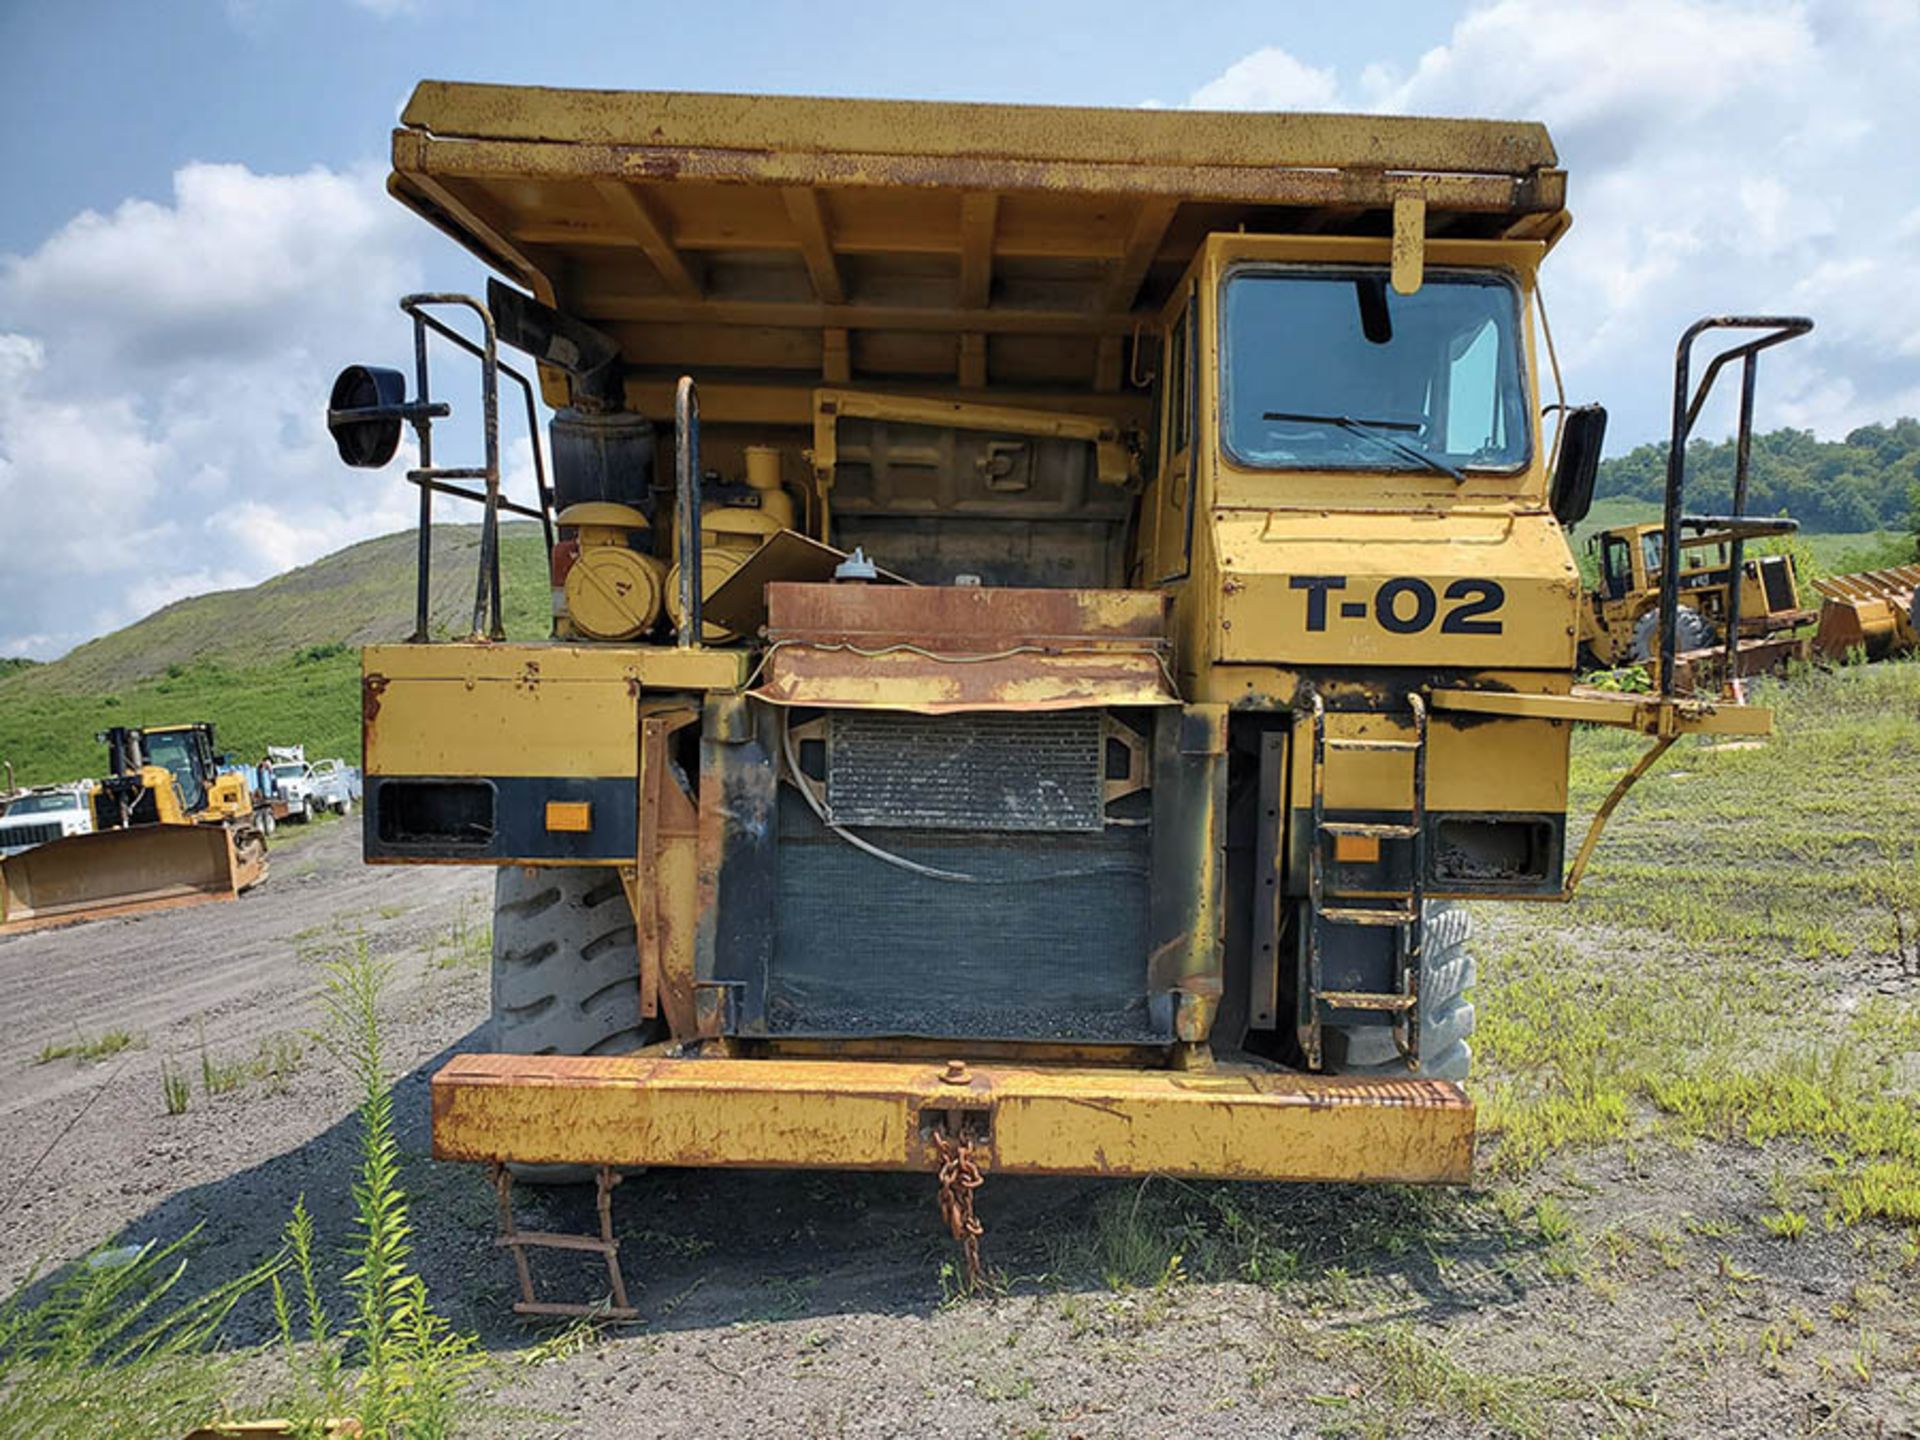 CATERPILLAR 773B OFF-ROAD DUMP TRUCK, S/N: 63W01175, 45,029 HRS.,21.00-35 TIRES, CAT 12-CYLINDER - Image 3 of 7